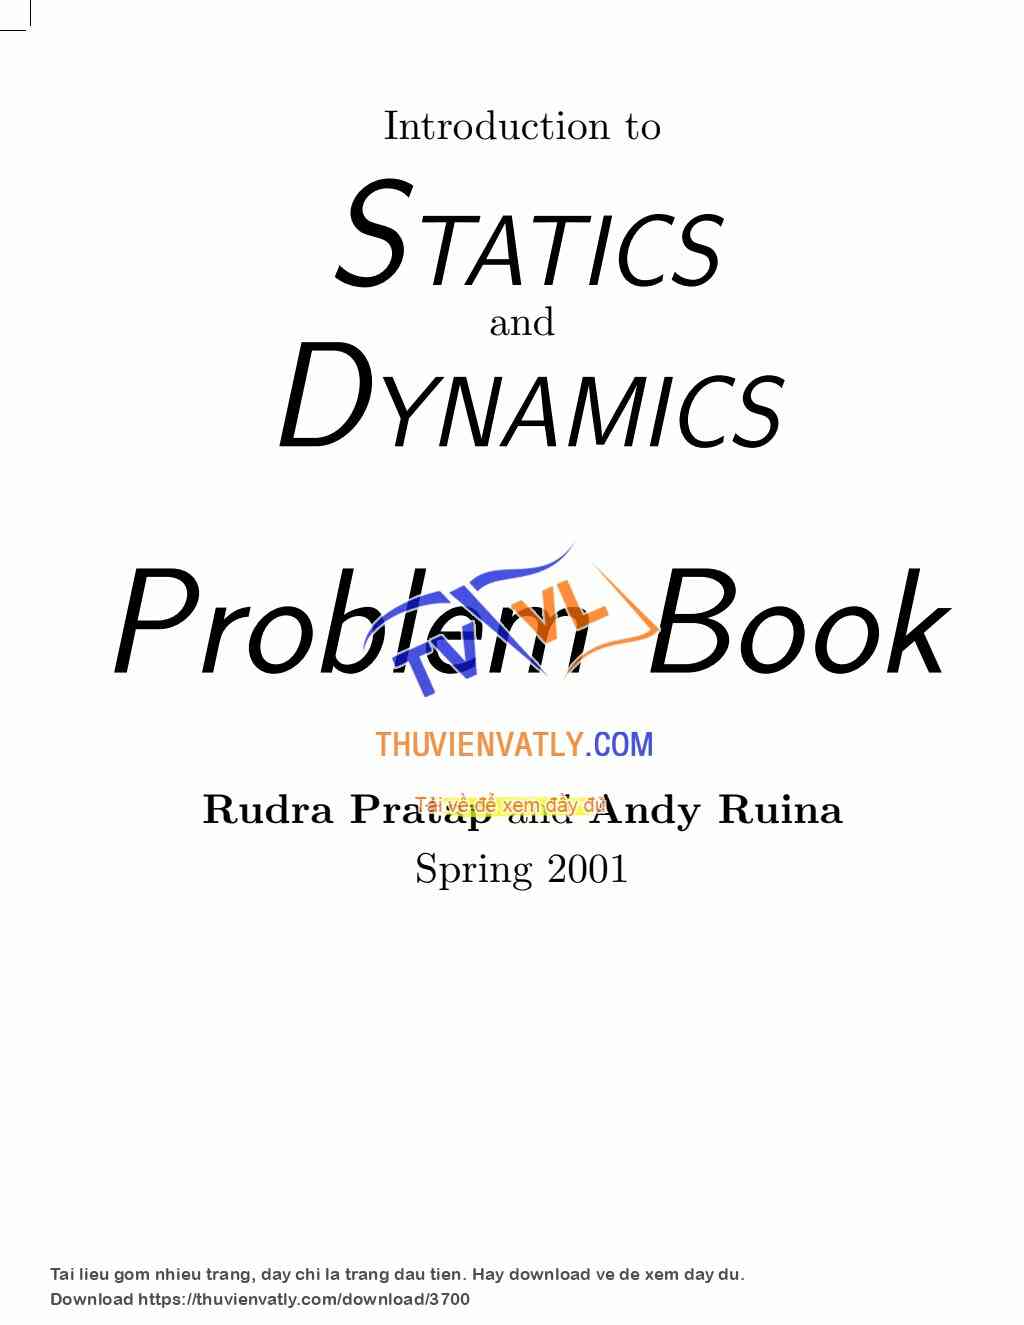 Introduction to Statics and Dynamics - Problem Book